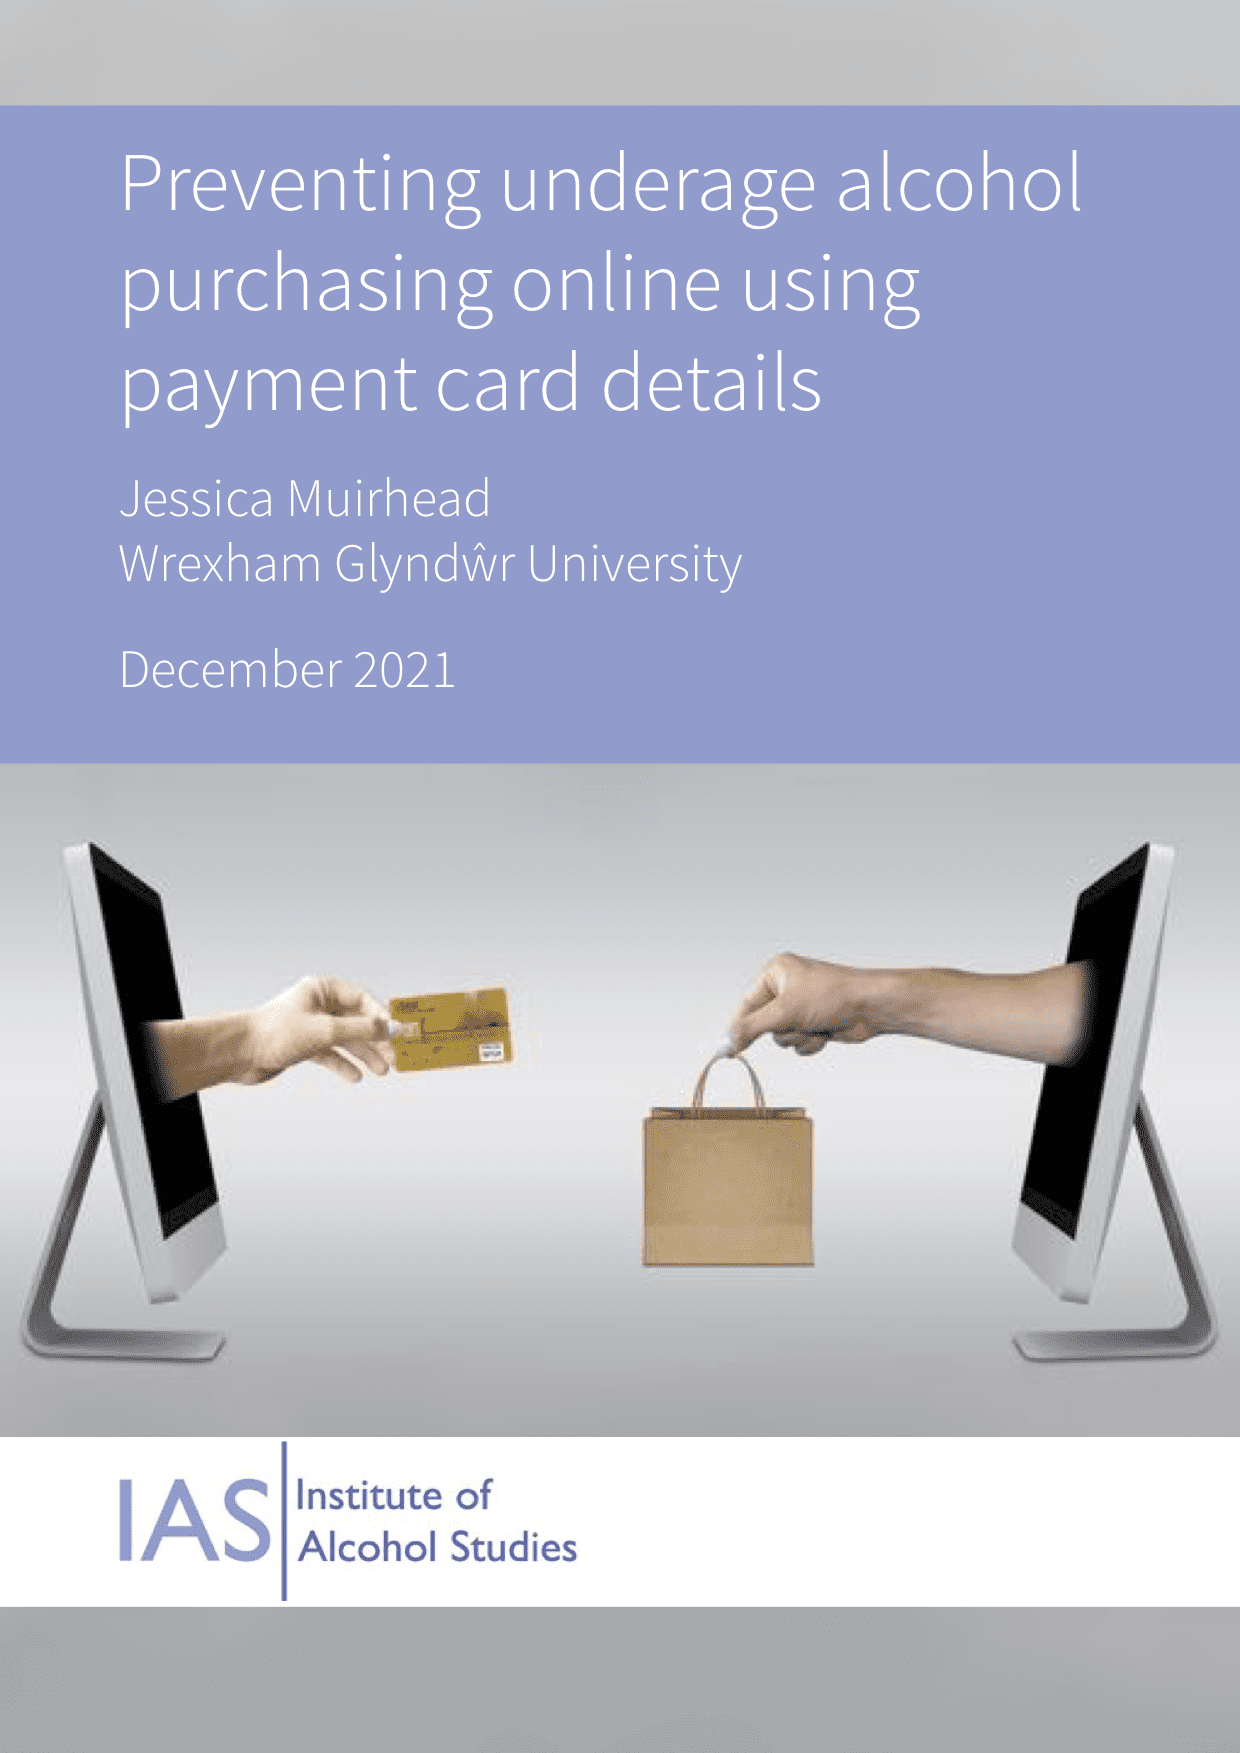 Preventing underage alcohol purchasing online using payment card details